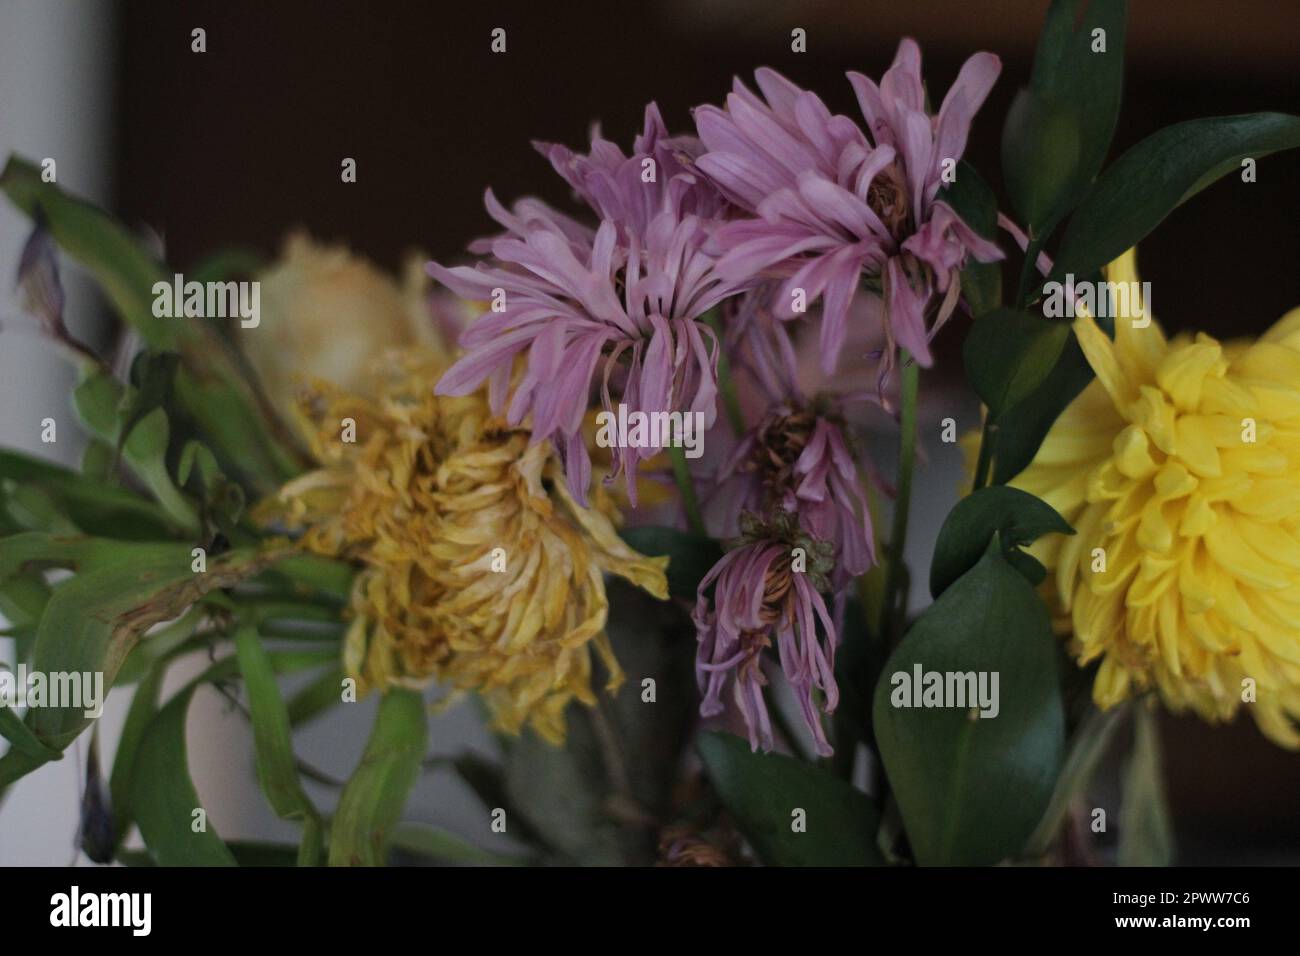 Close-up shot of a Wilting  Spring Floral Bouquet -Details and image has purple, yellow, and green throughout. Great for education or dramatic effect Stock Photo